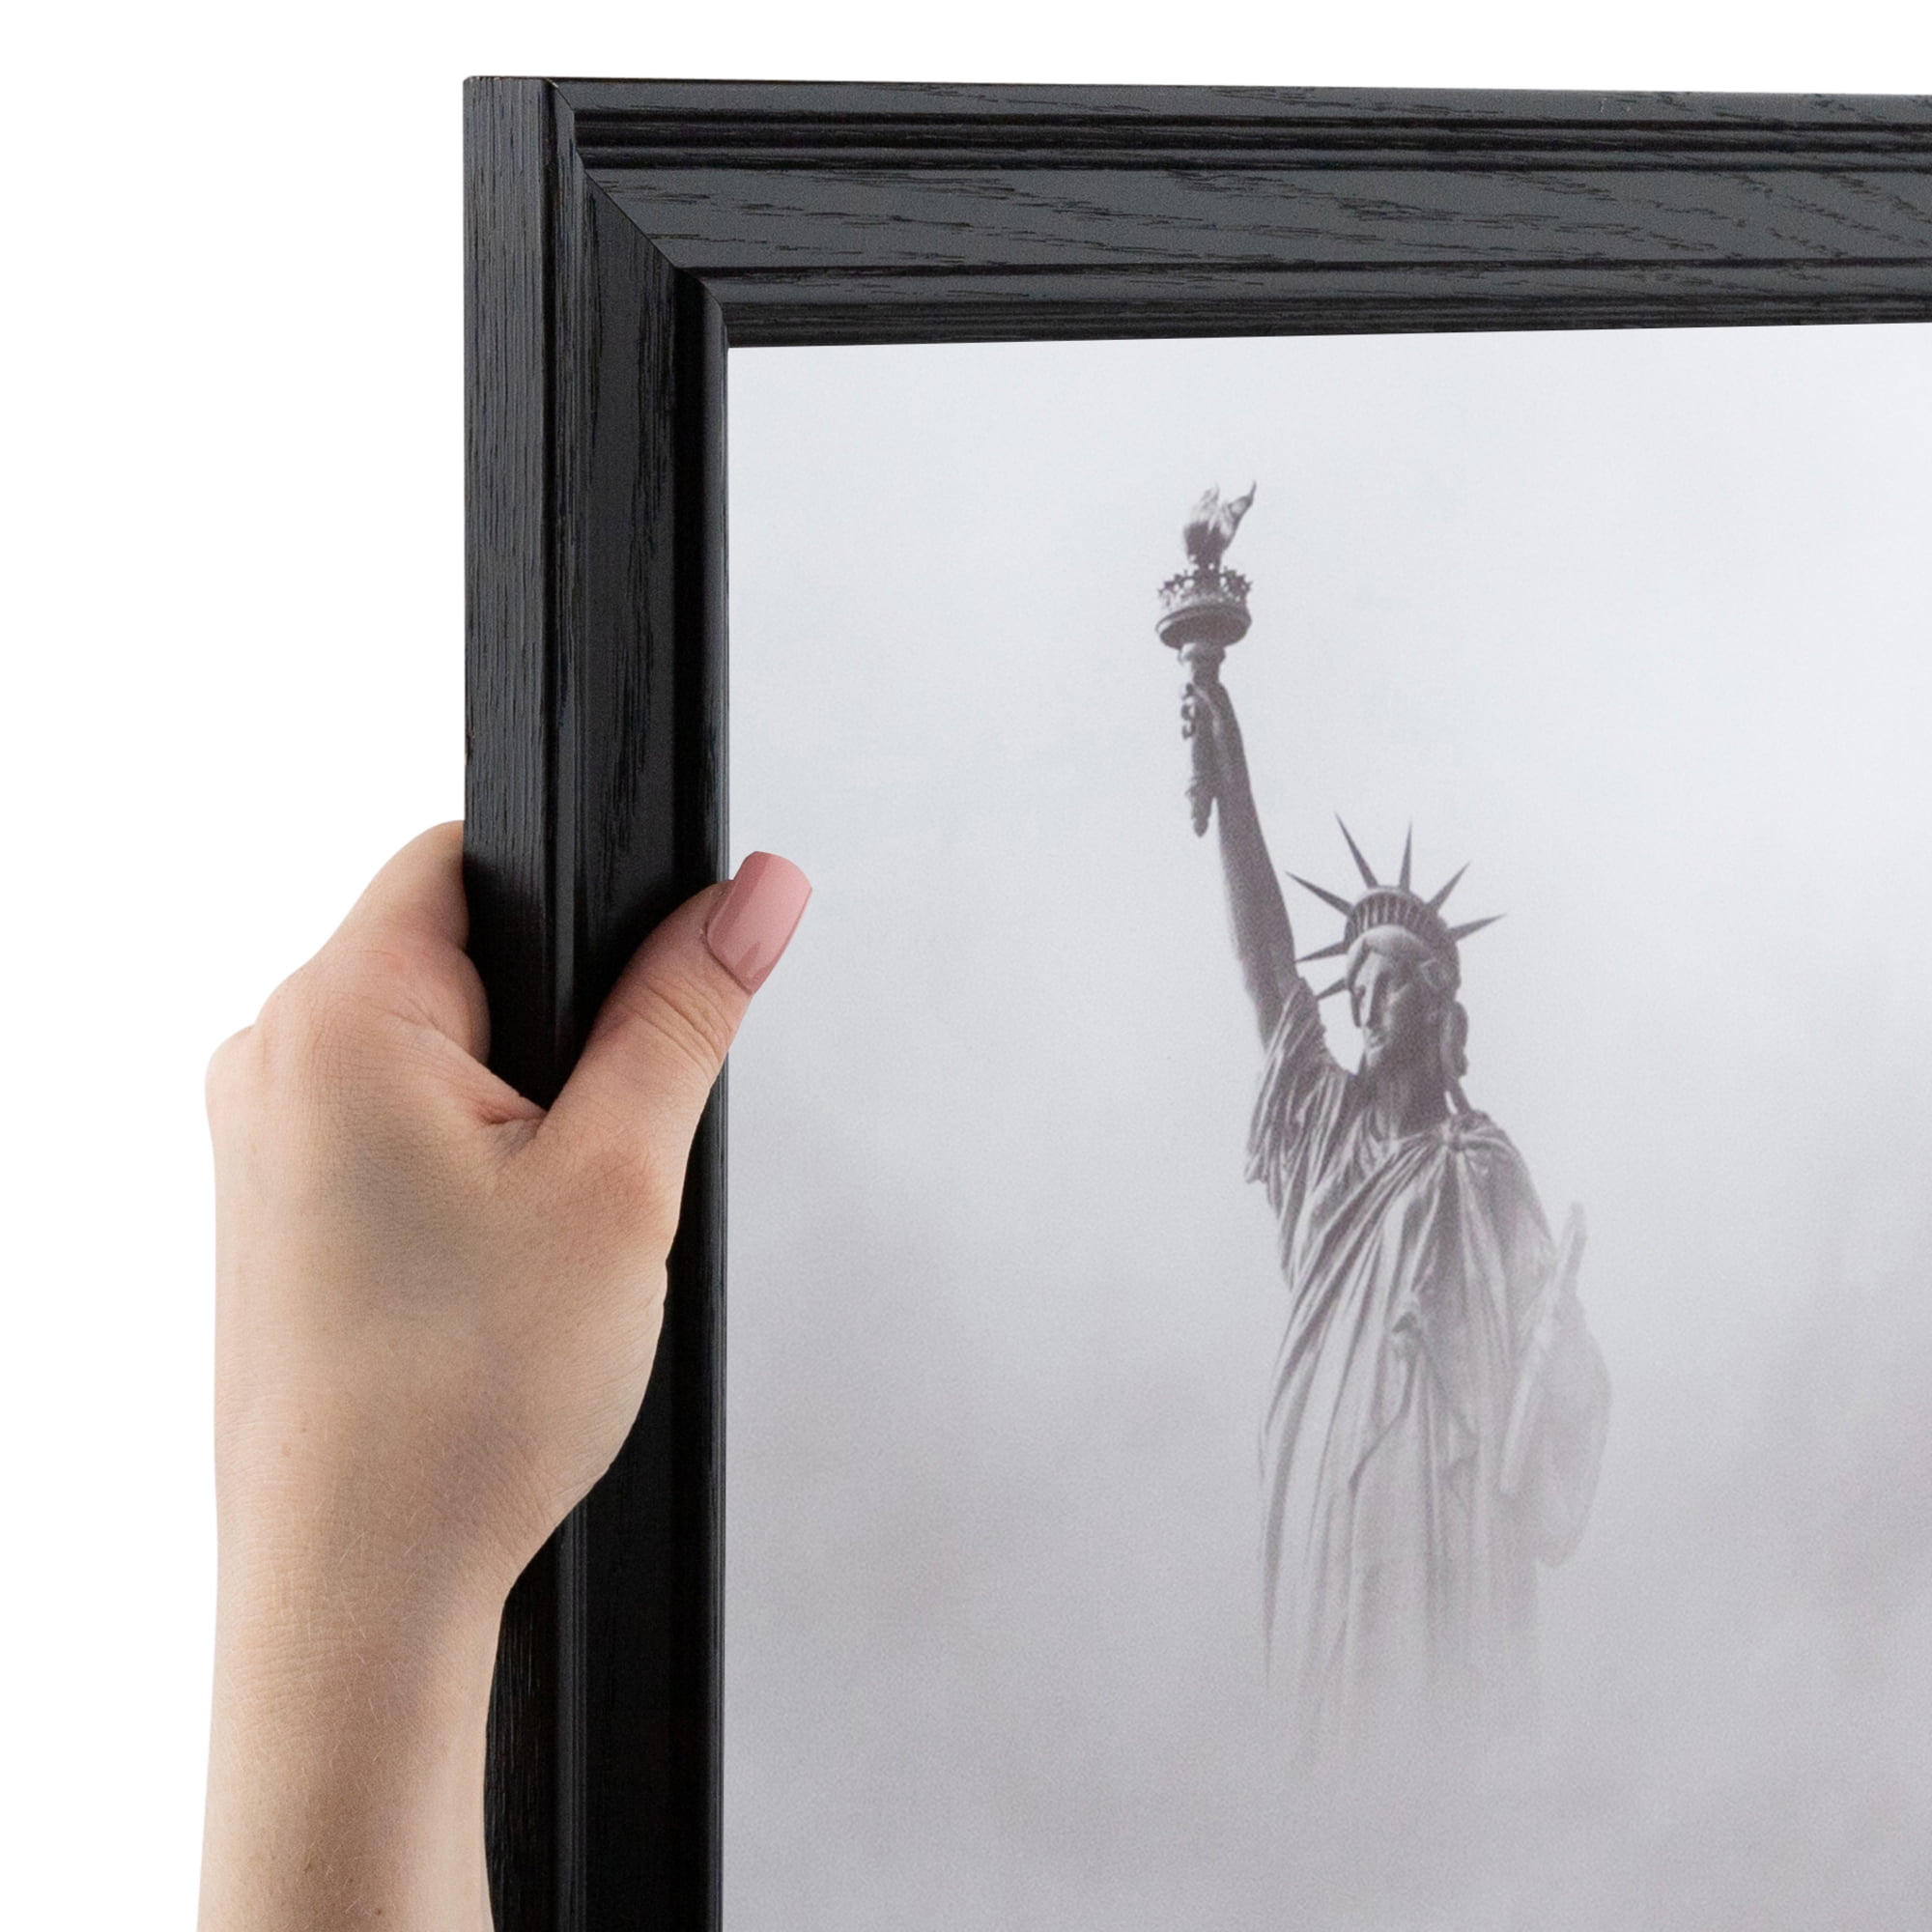 WOMFRBW26079-20x24 NEW! ArtToFrames 20x24 inch Satin Black Picture Frame 